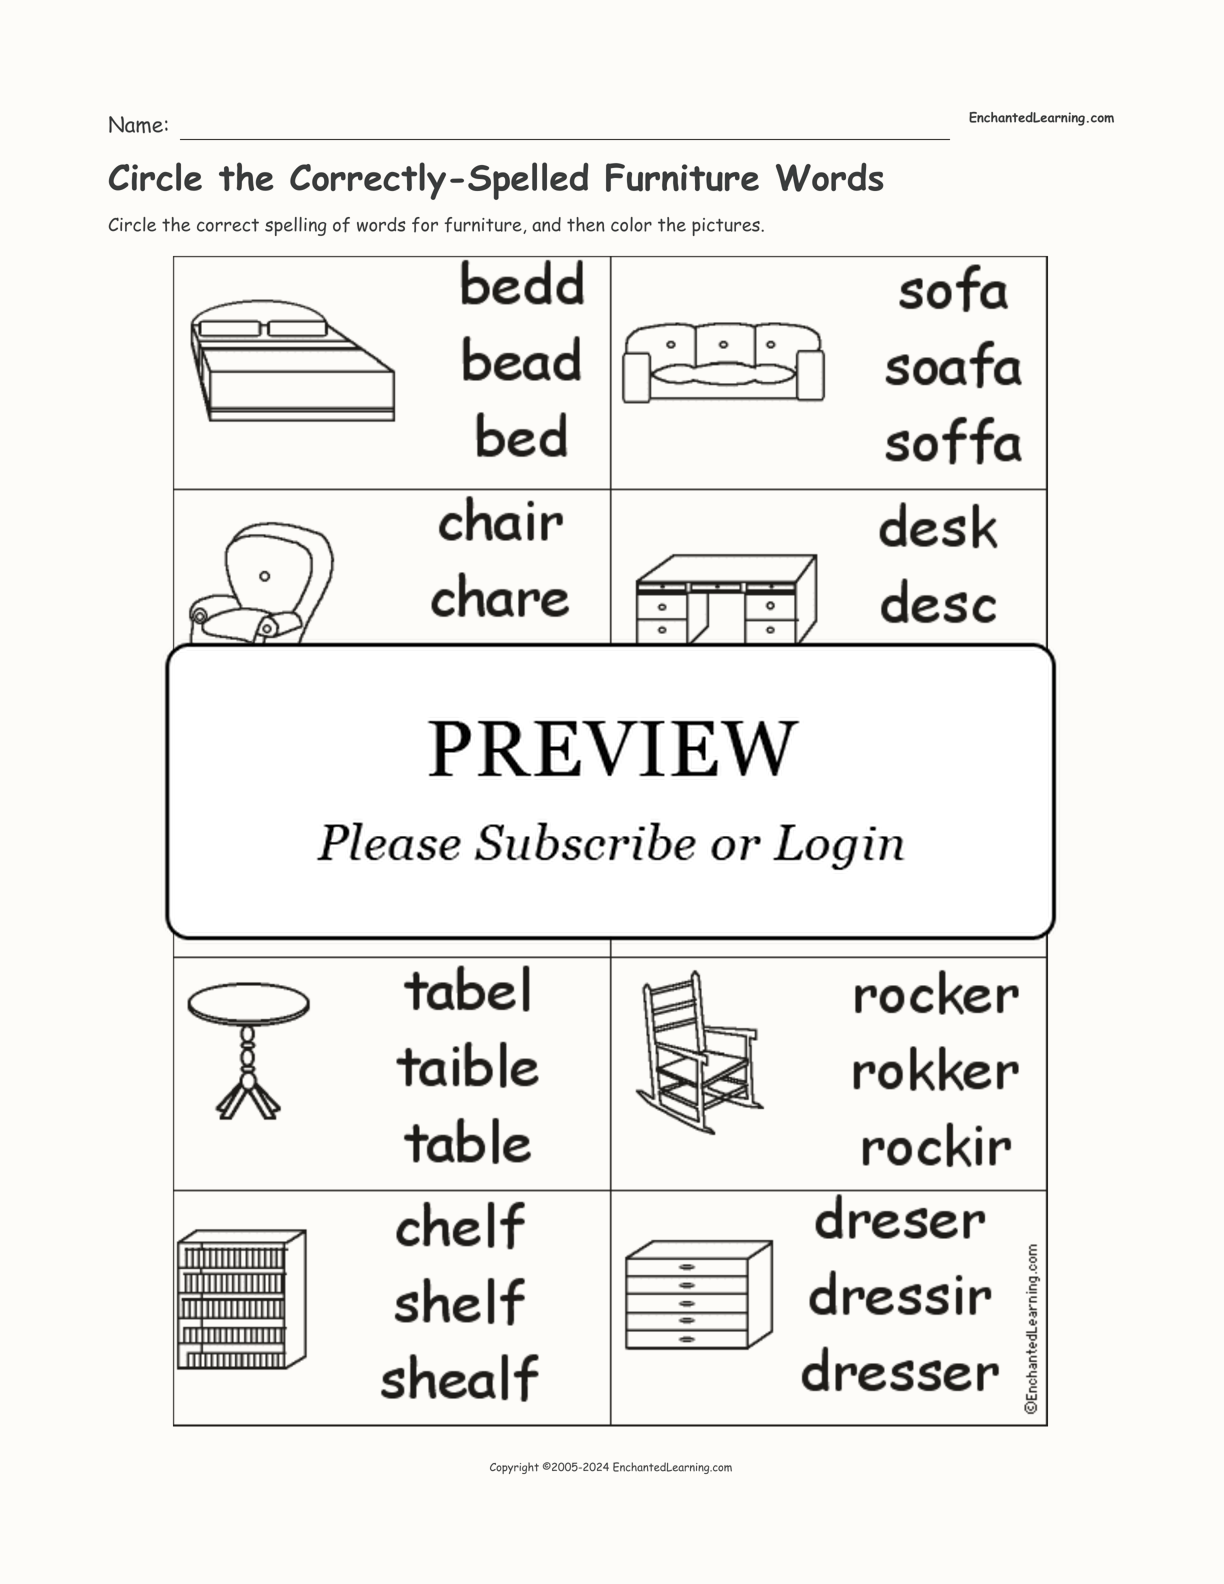 Circle the Correctly-Spelled Furniture Words interactive worksheet page 1